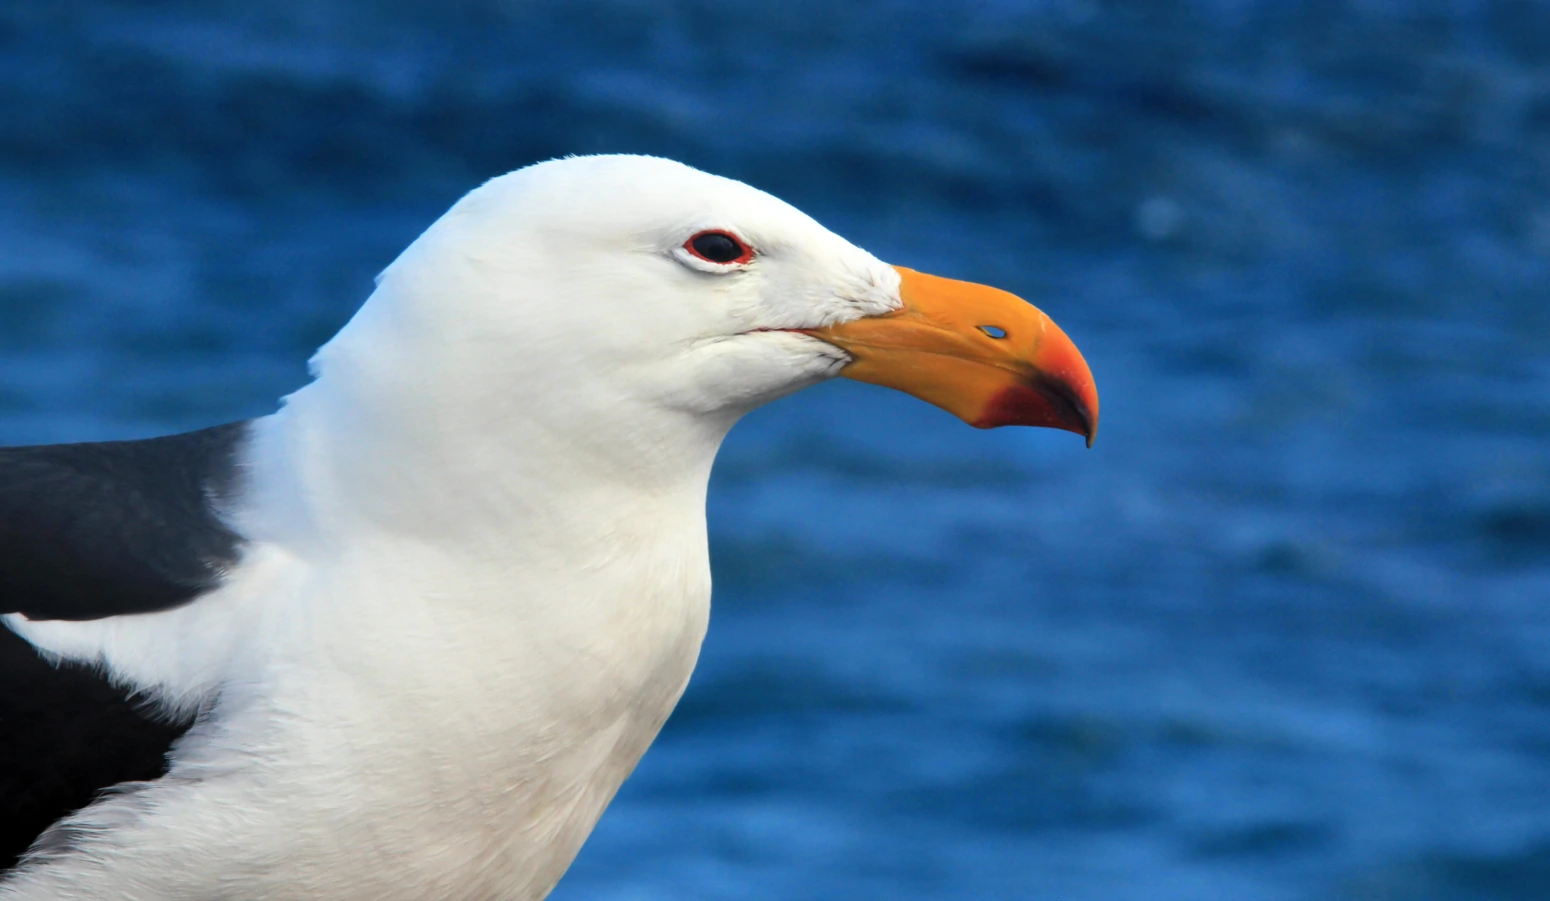 Profile of a sea bird's head with a hole in its beak.